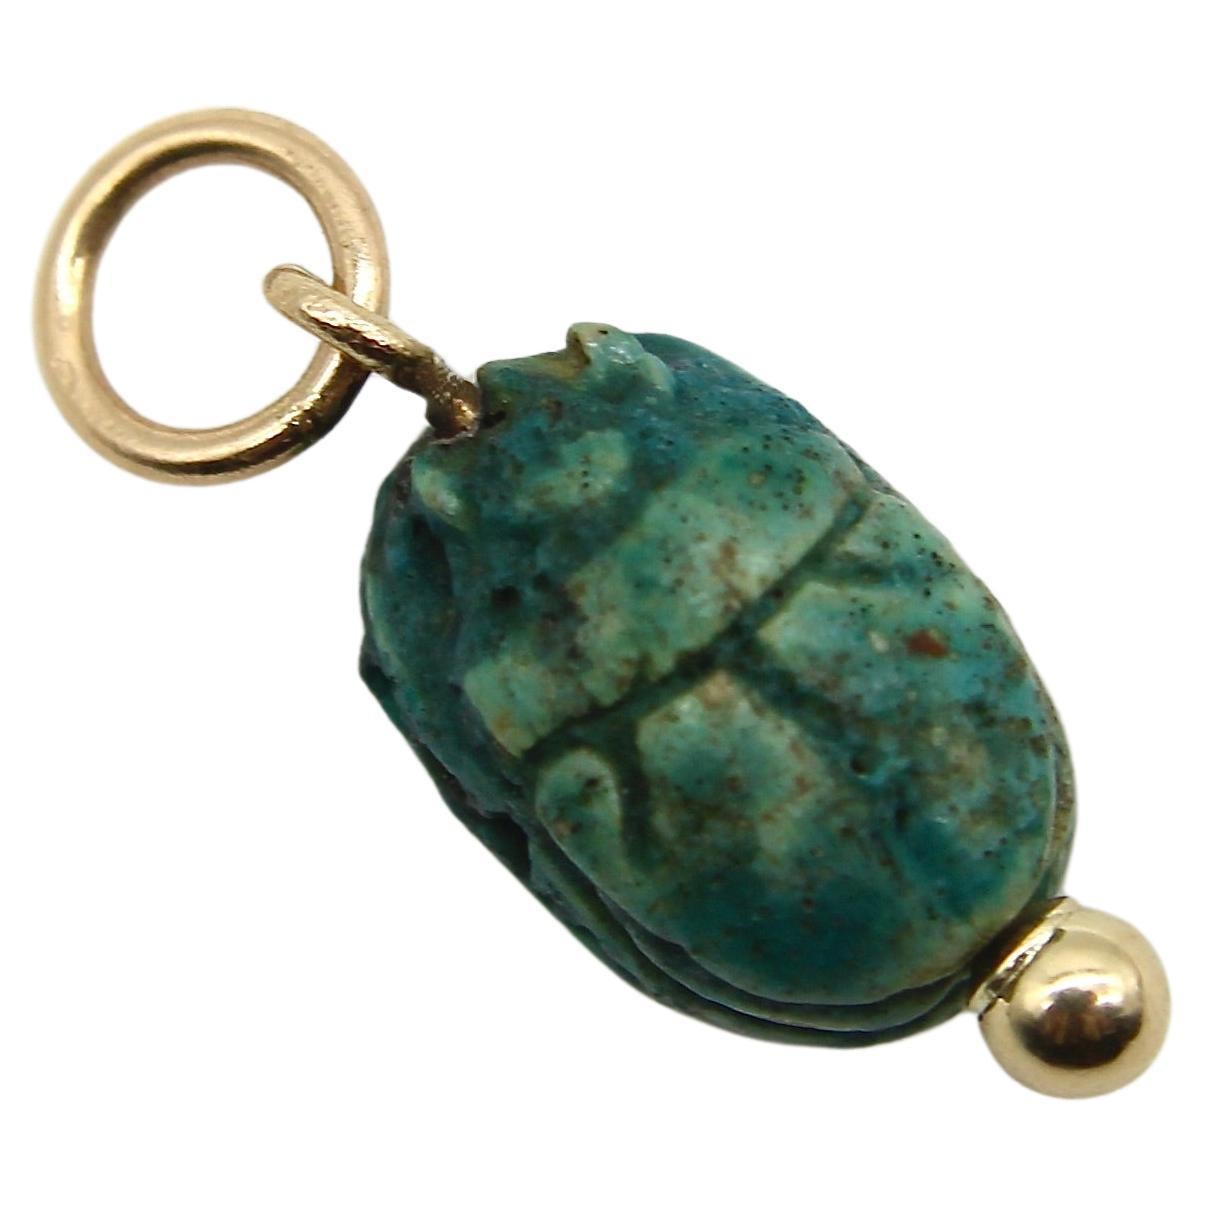 Egyptian Revival Small Turquoise Faience Scarab Pendant with 14K Gold Mount 